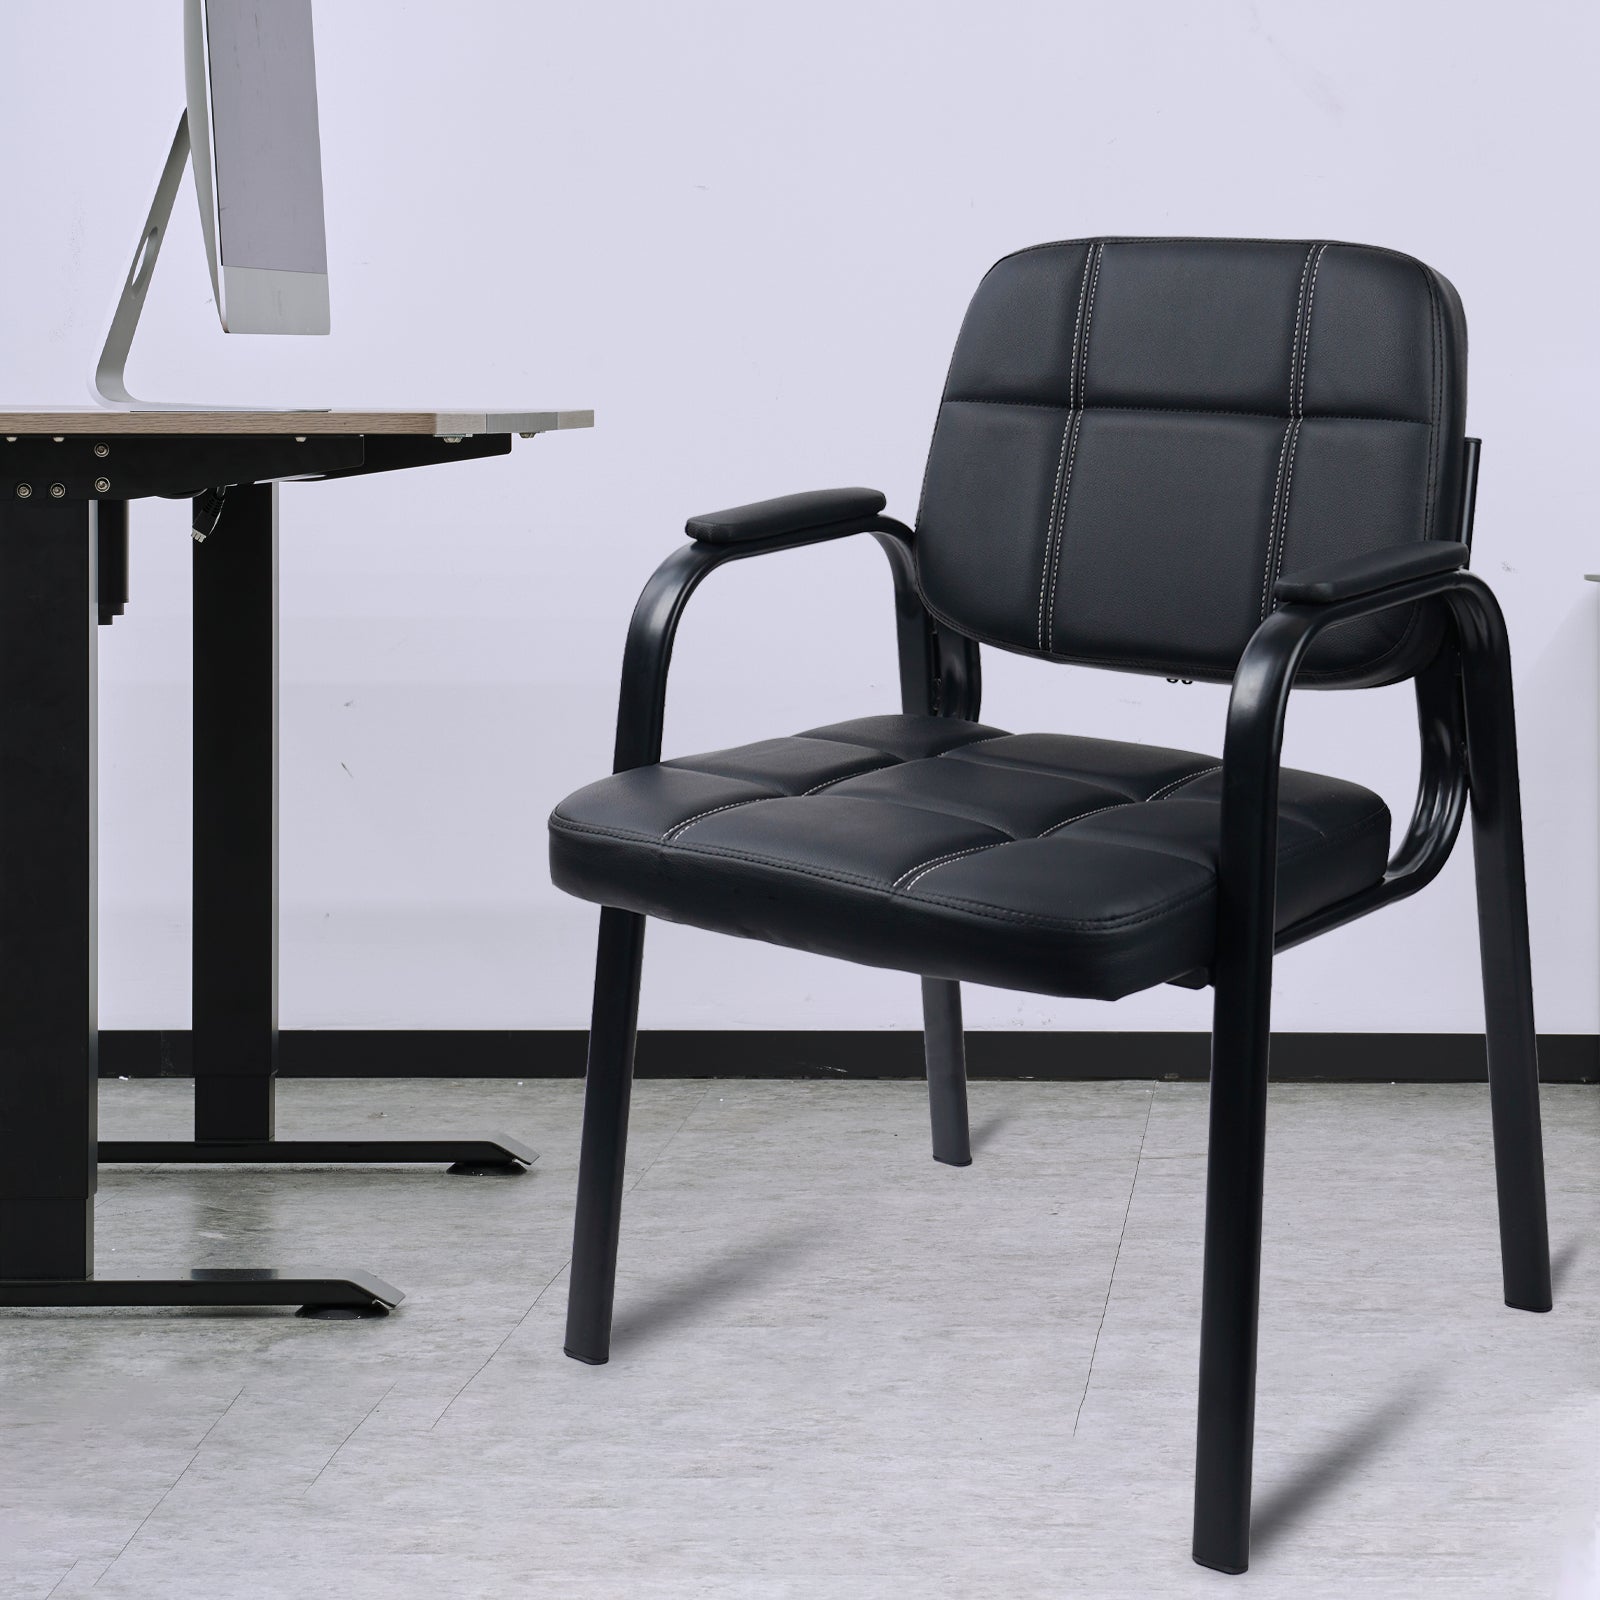 KLASIKA Office Guest Chair Reception Chair with Leather Bonded Padded Arm Rest Non Slip Desk Chair for Reception Conference Waiting Room Side Office Home Black